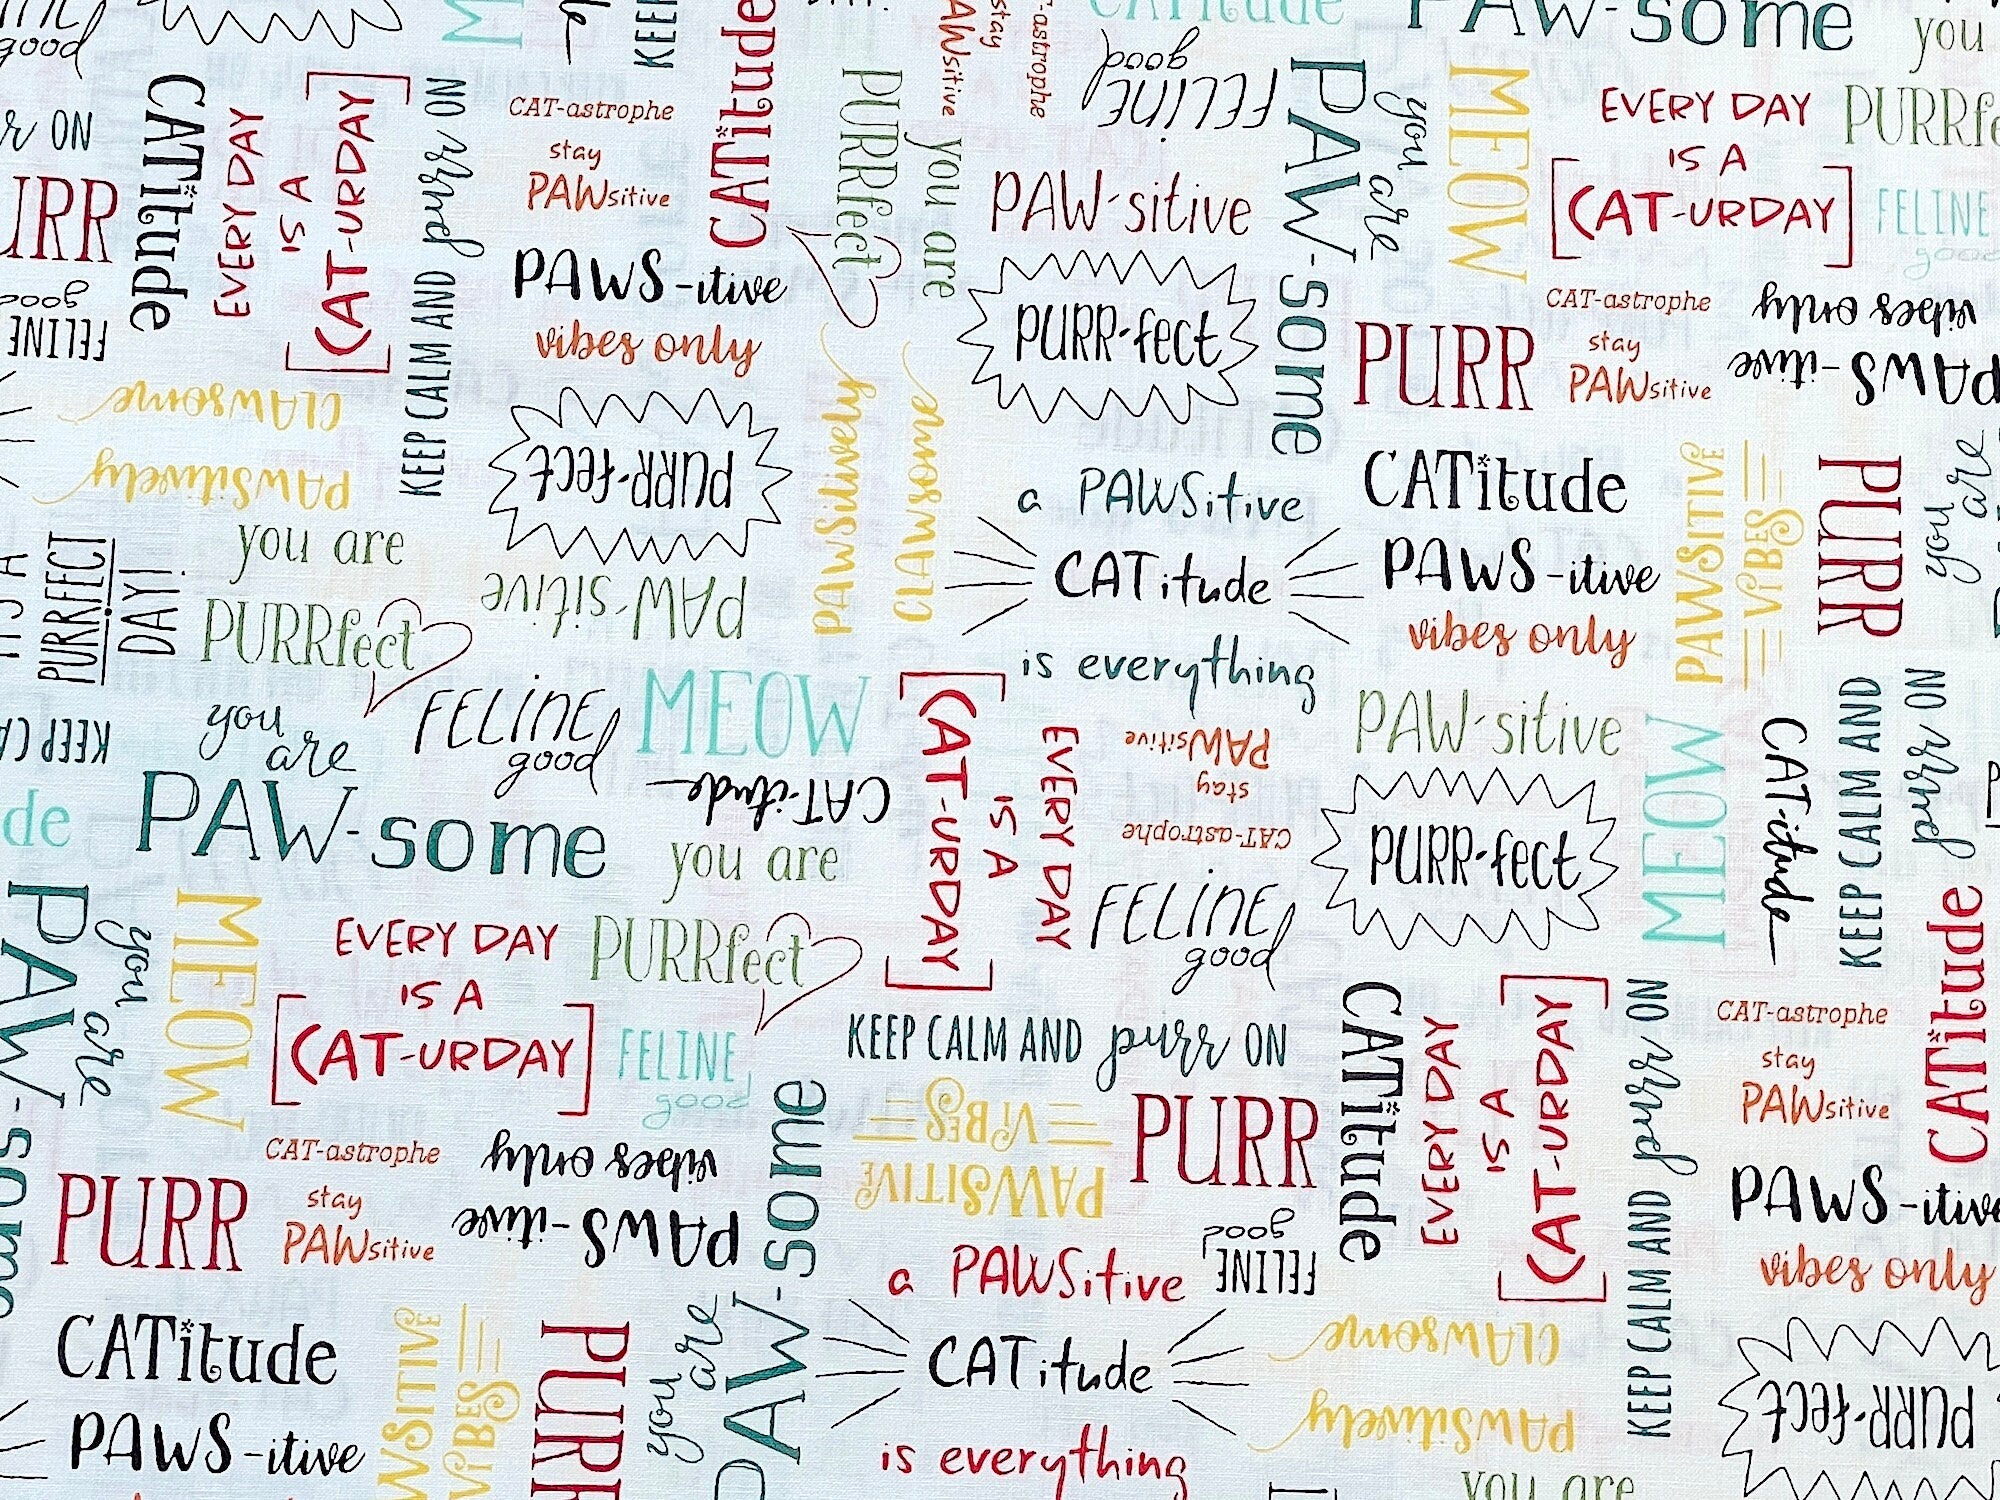 Cat sayings cover this off-white/light cream fabric. Some of the sayings include meow, purr, It's a purrfect day, everyday is a cat-urday and more.